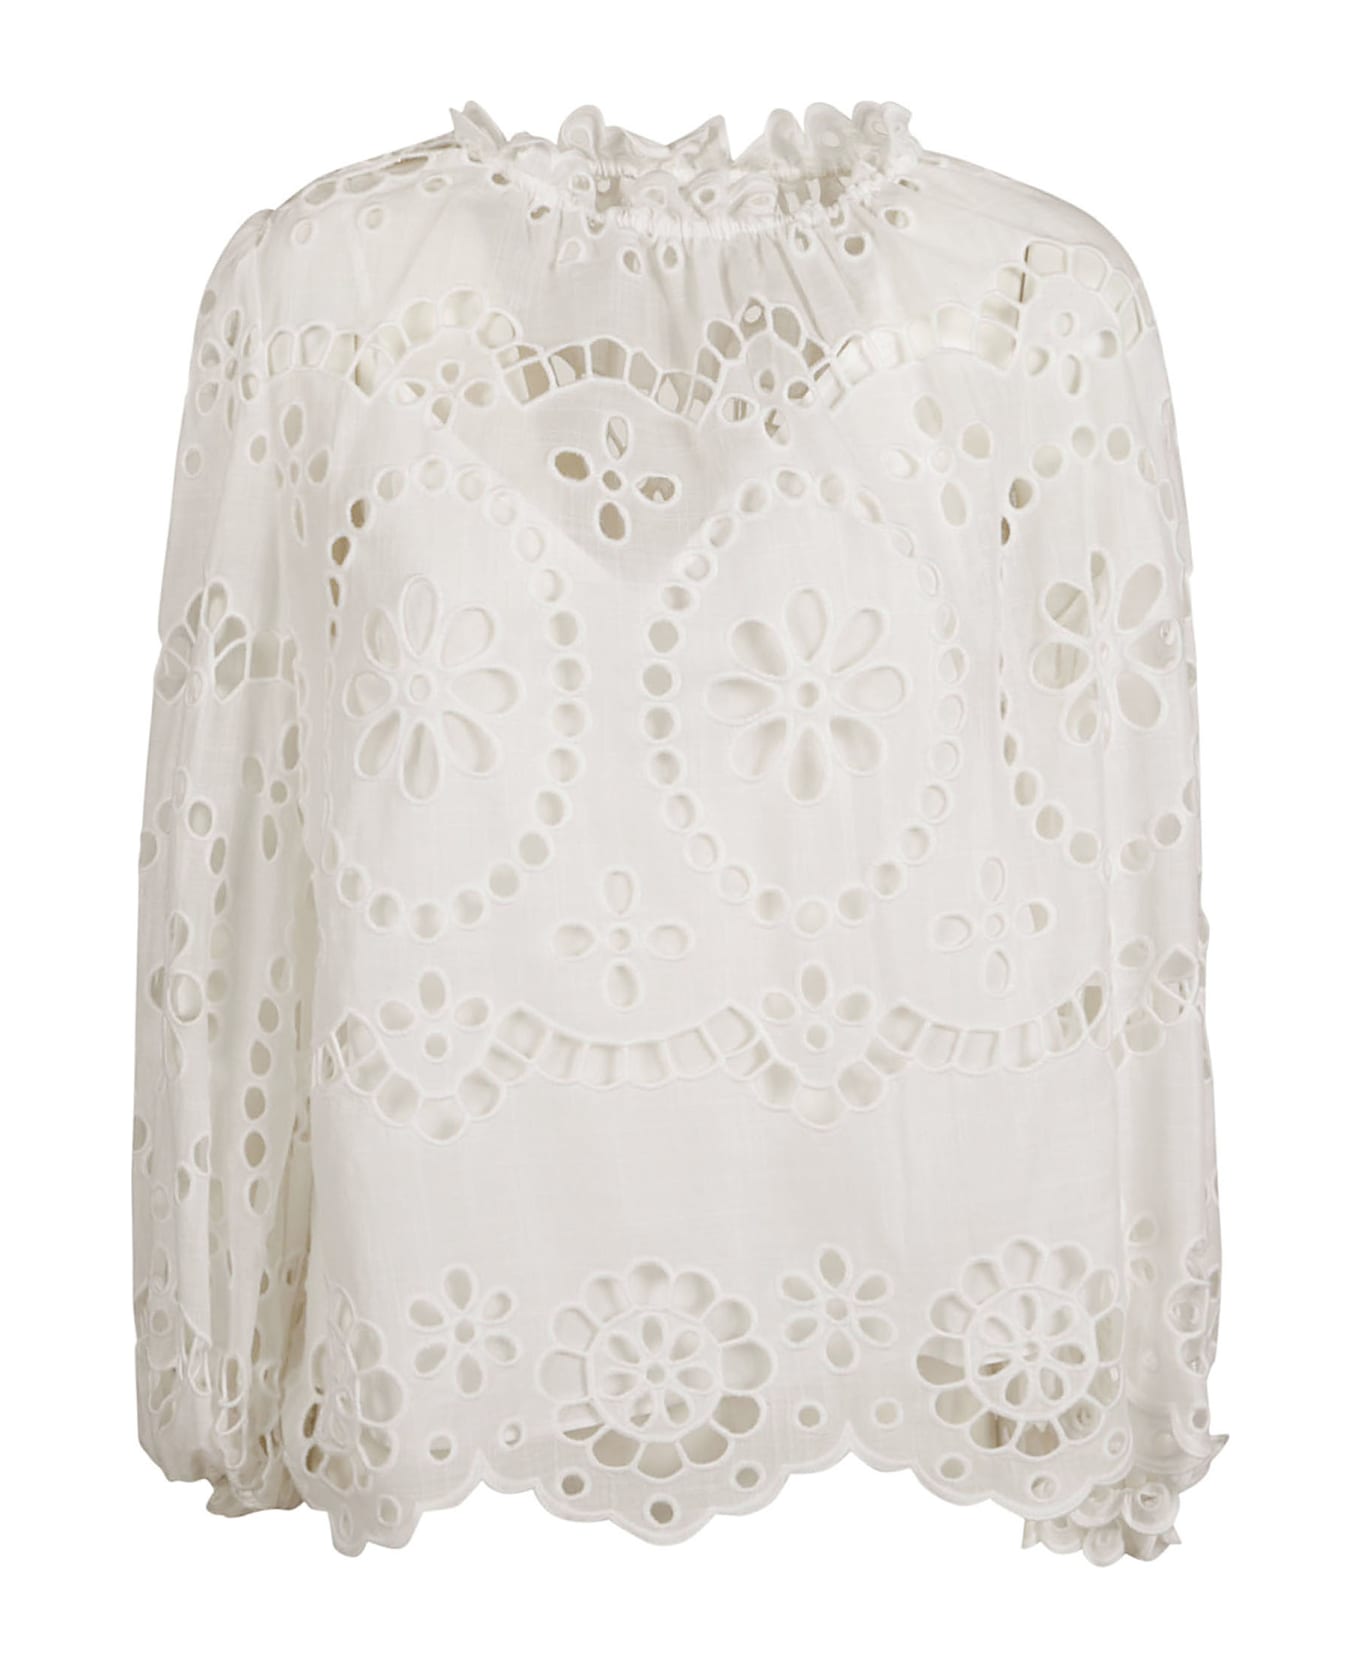 Zimmermann Lexi Embroidered Blouse - Bianco